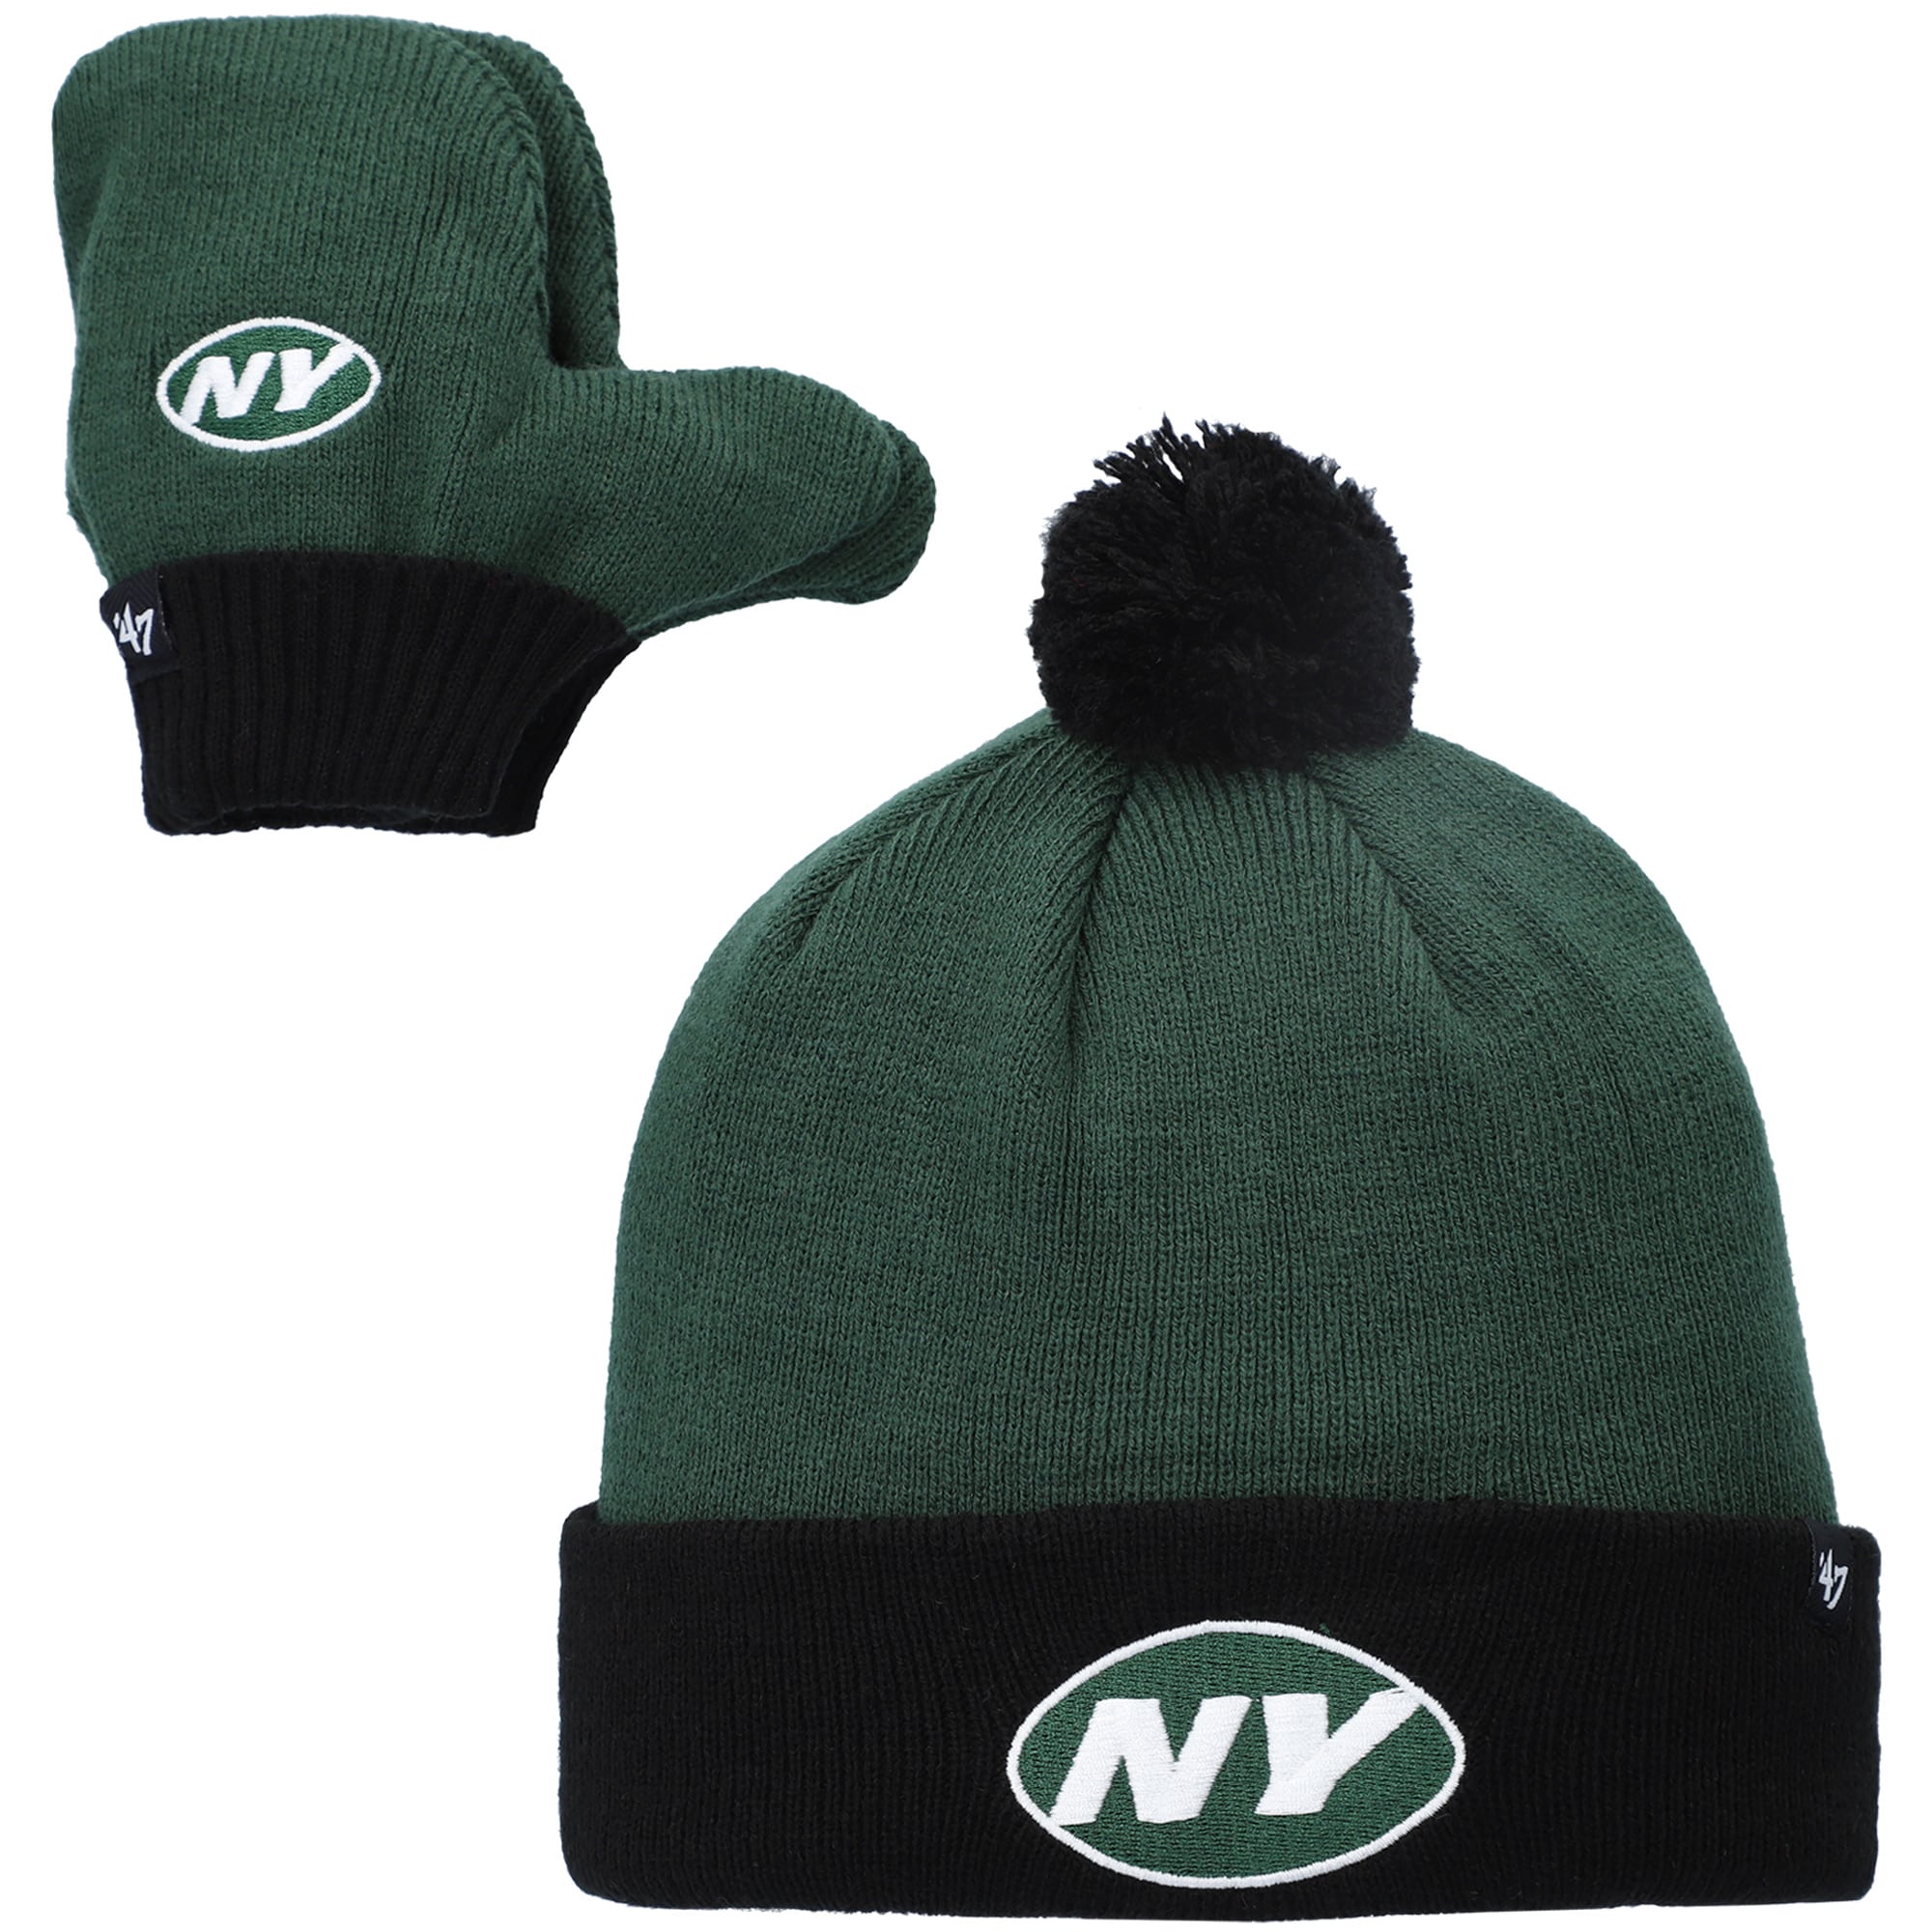 new york jets wooly hat